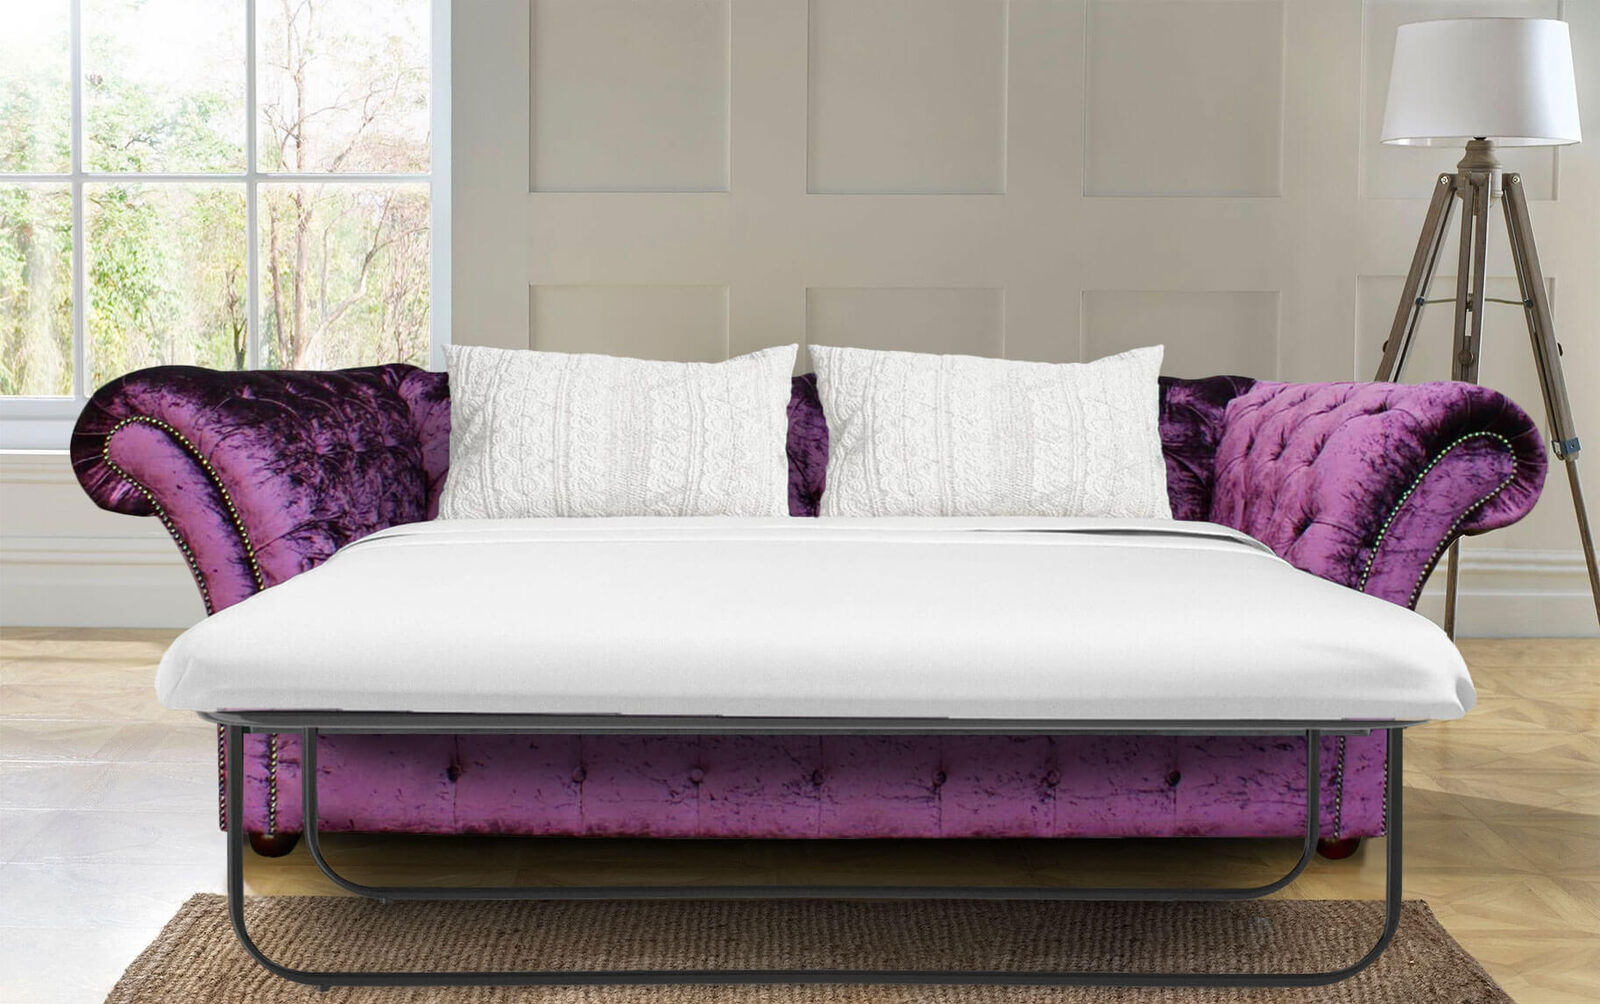 Product photograph of Chesterfield Balmoral Purple 3 Seater Sofabed Settee Boutique Crush Velvet Fabric from Designer Sofas 4U